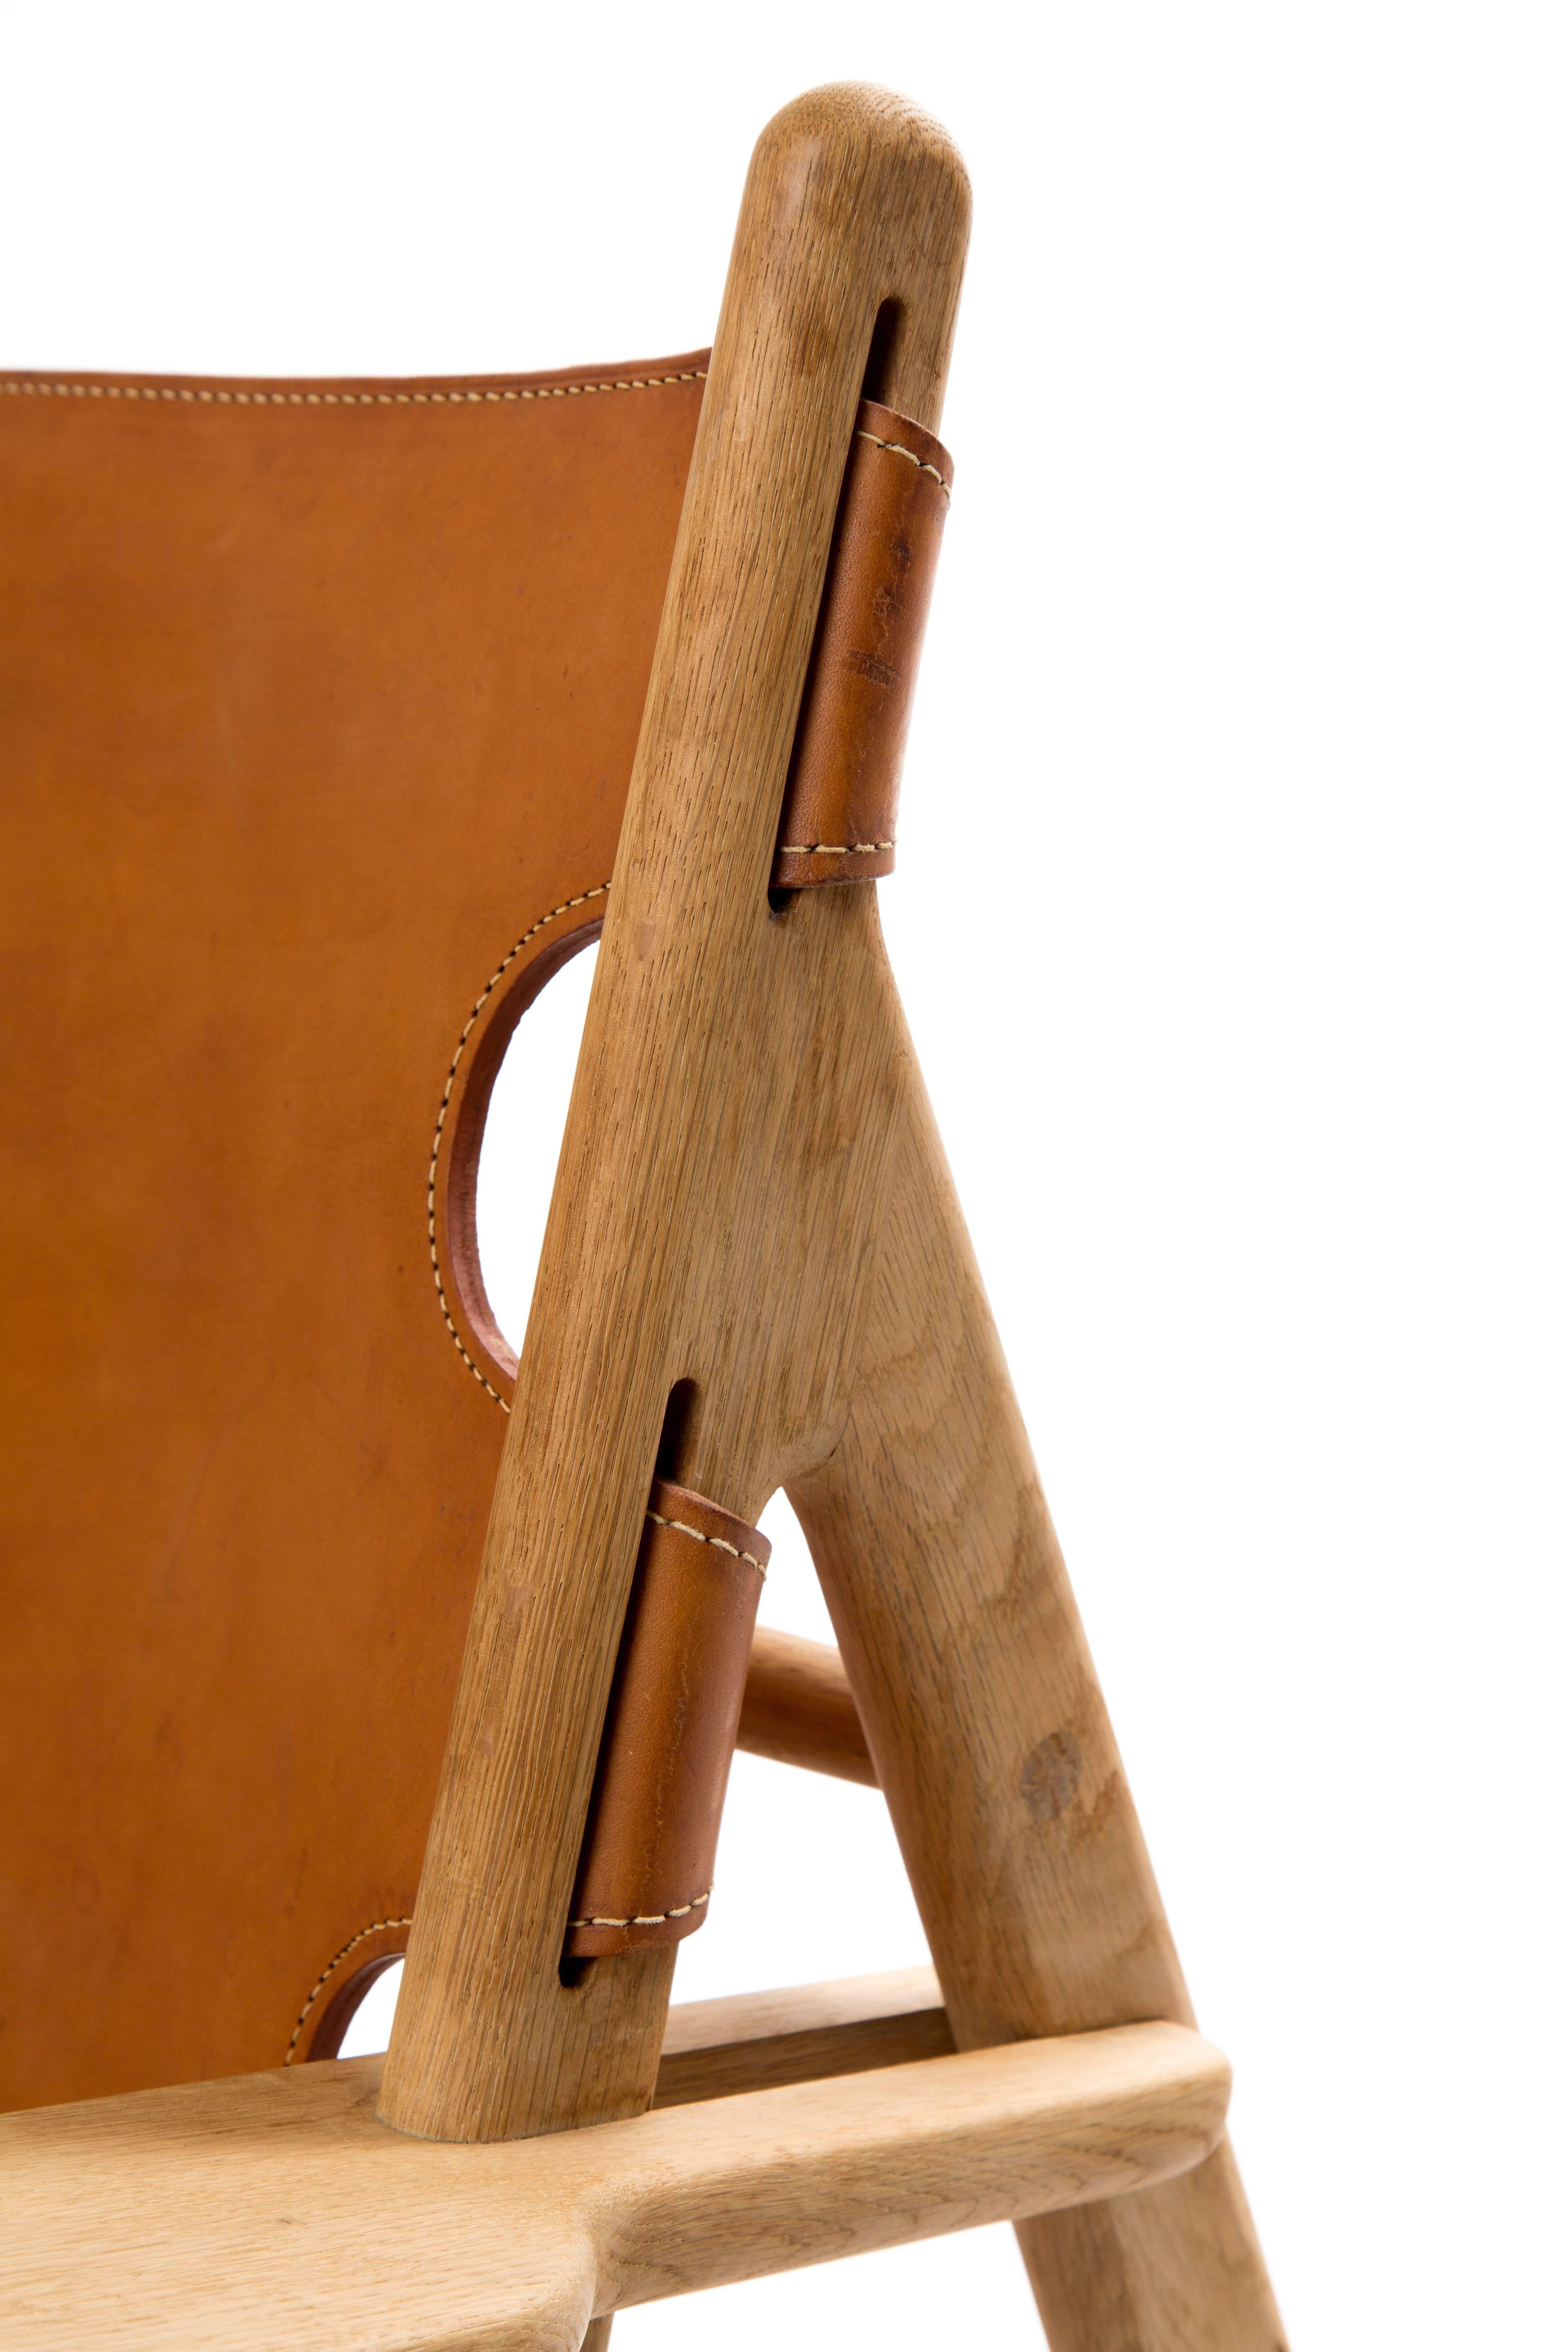 set HUNTING CHAIRS of Borge Mogensen in saddle leather  1